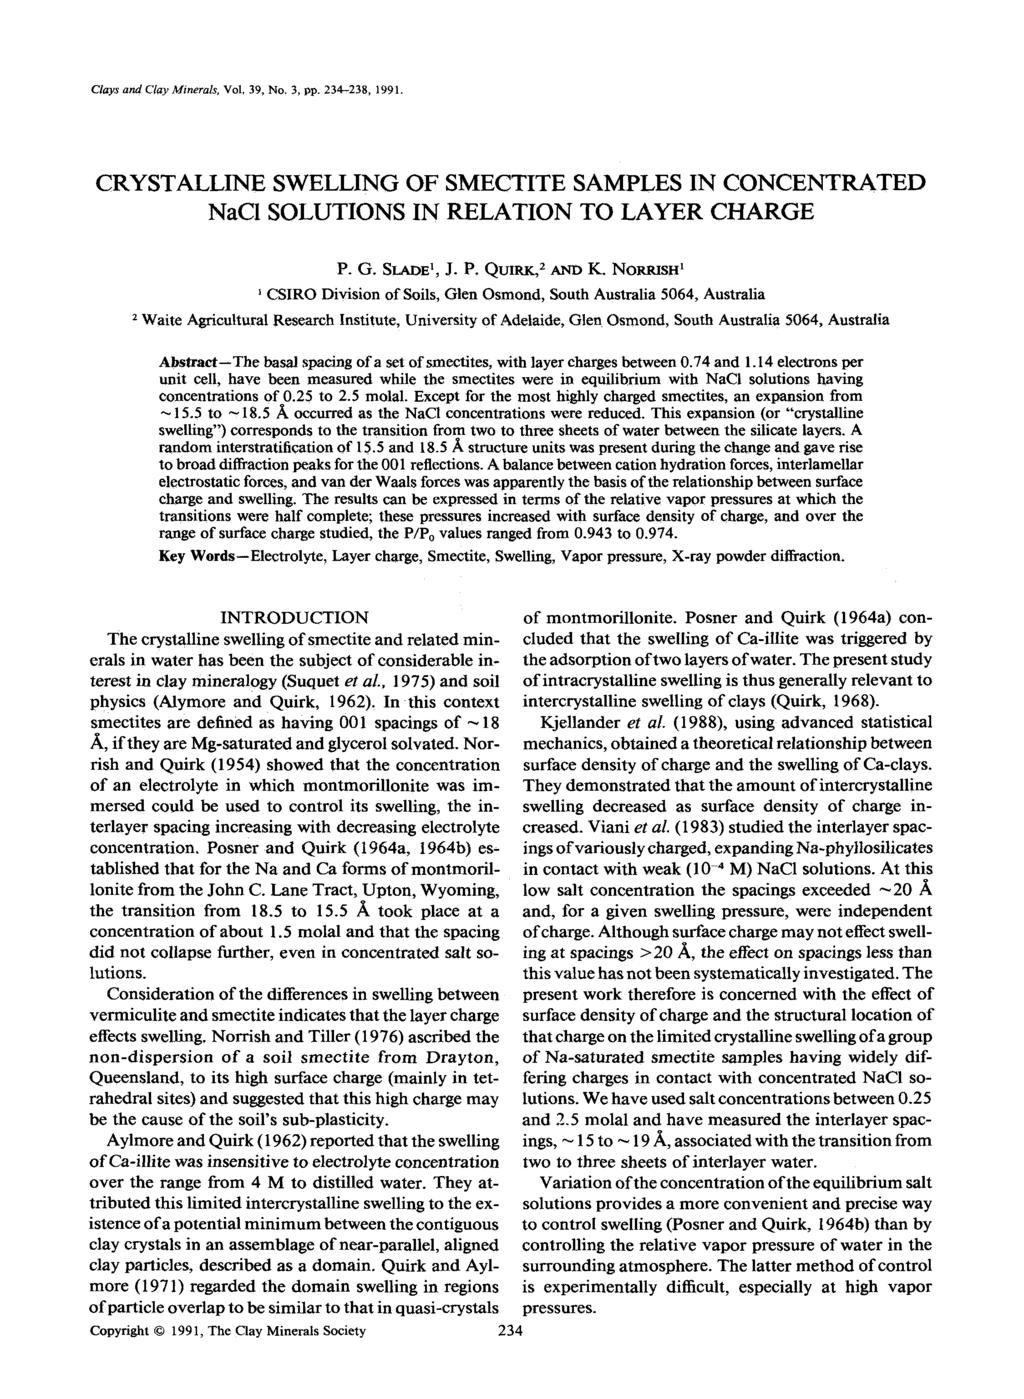 Clays and Clay Minerals, Vol. 39, No. 3, pp. 234-238, 1991. CRYSTALLINE SWELLING OF SMECTITE SAMPLES IN CONCENTRATED NaCI SOLUTIONS IN RELATION TO LAYER CHARGE P. G. SLADE 1, J. P. QUIRK, 2 AND K.